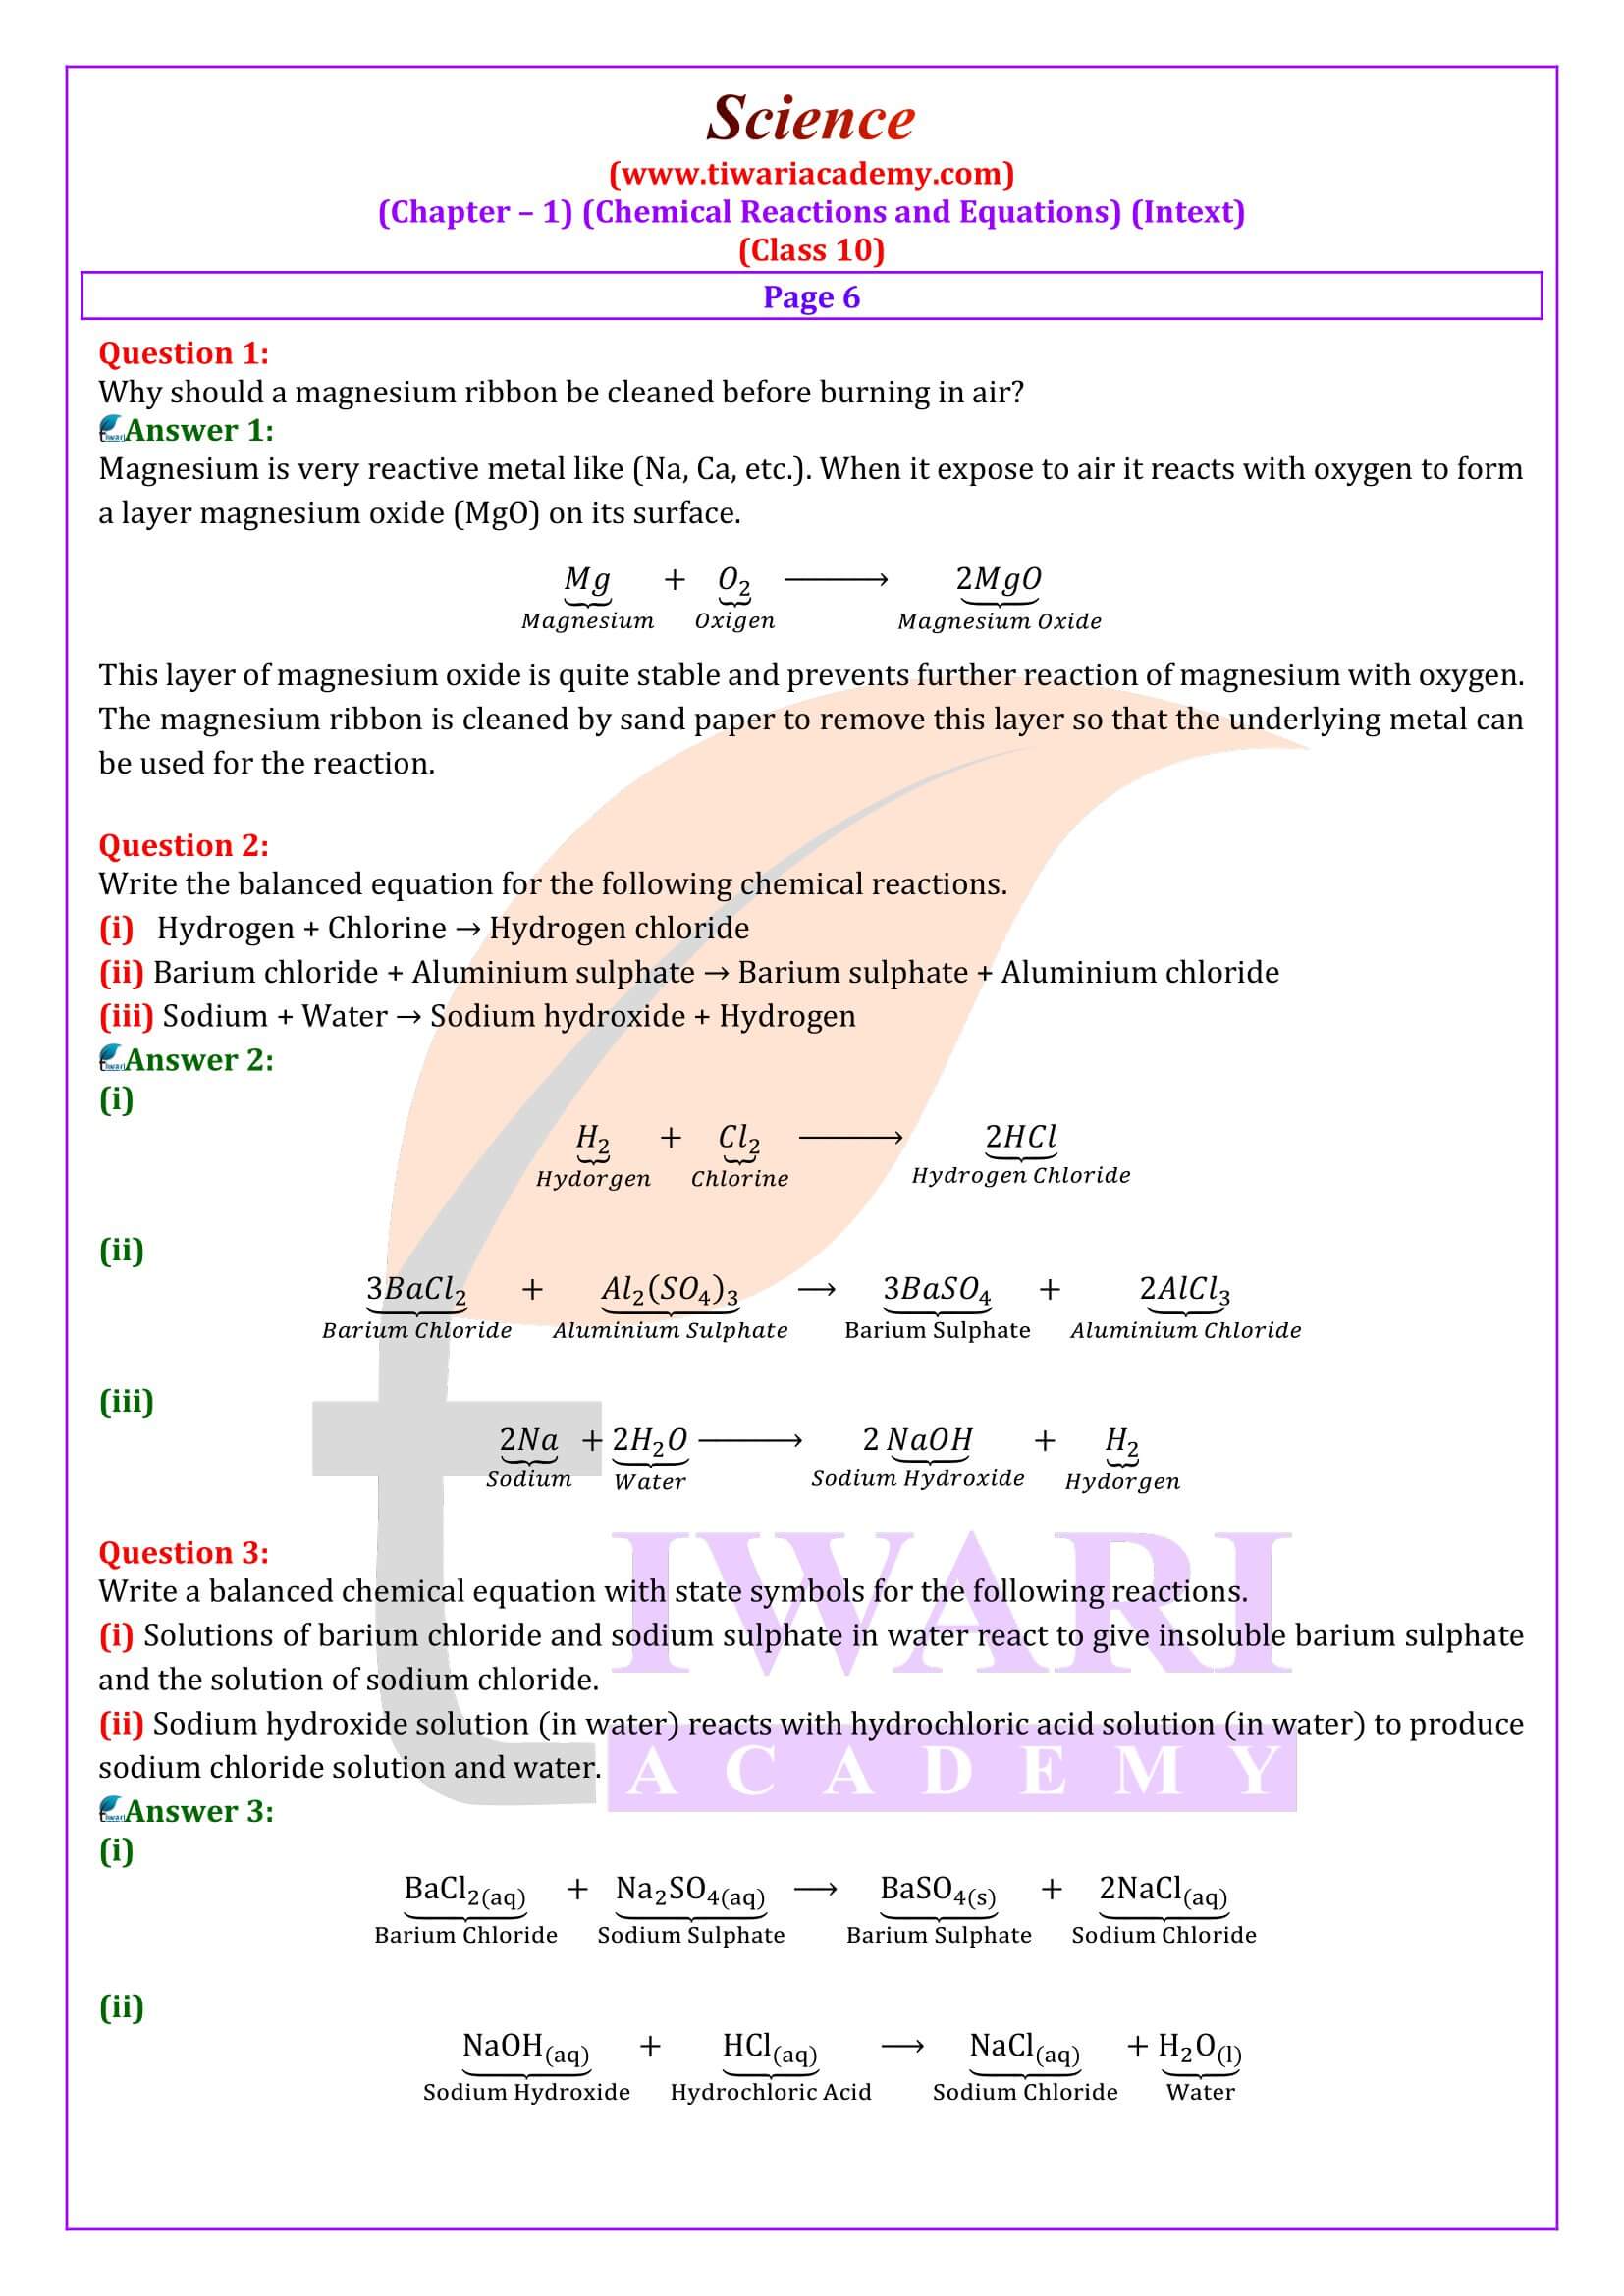 NCERT Solutions for Class 10 Science Chapter 1 Intext Questions